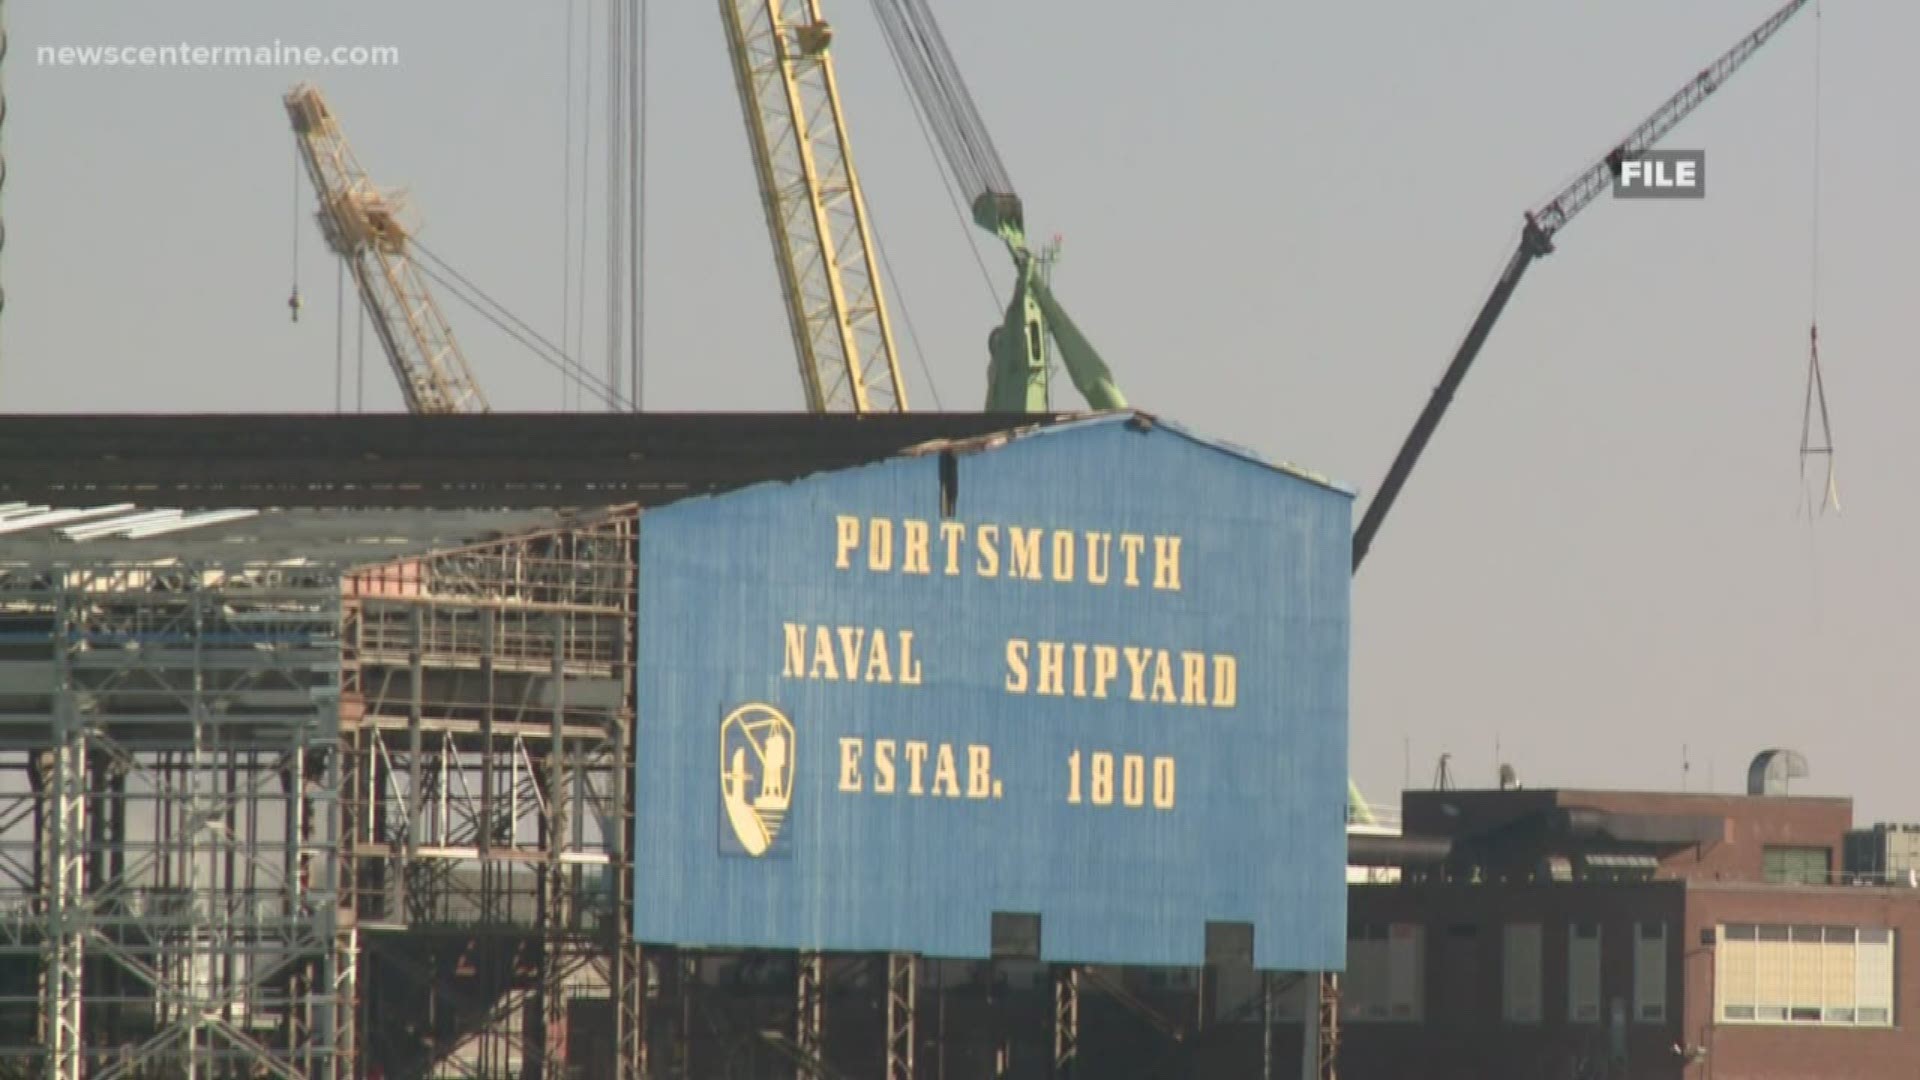 Projects are being completed late due to the aging of Portsmouth Naval Shipyards equipment.